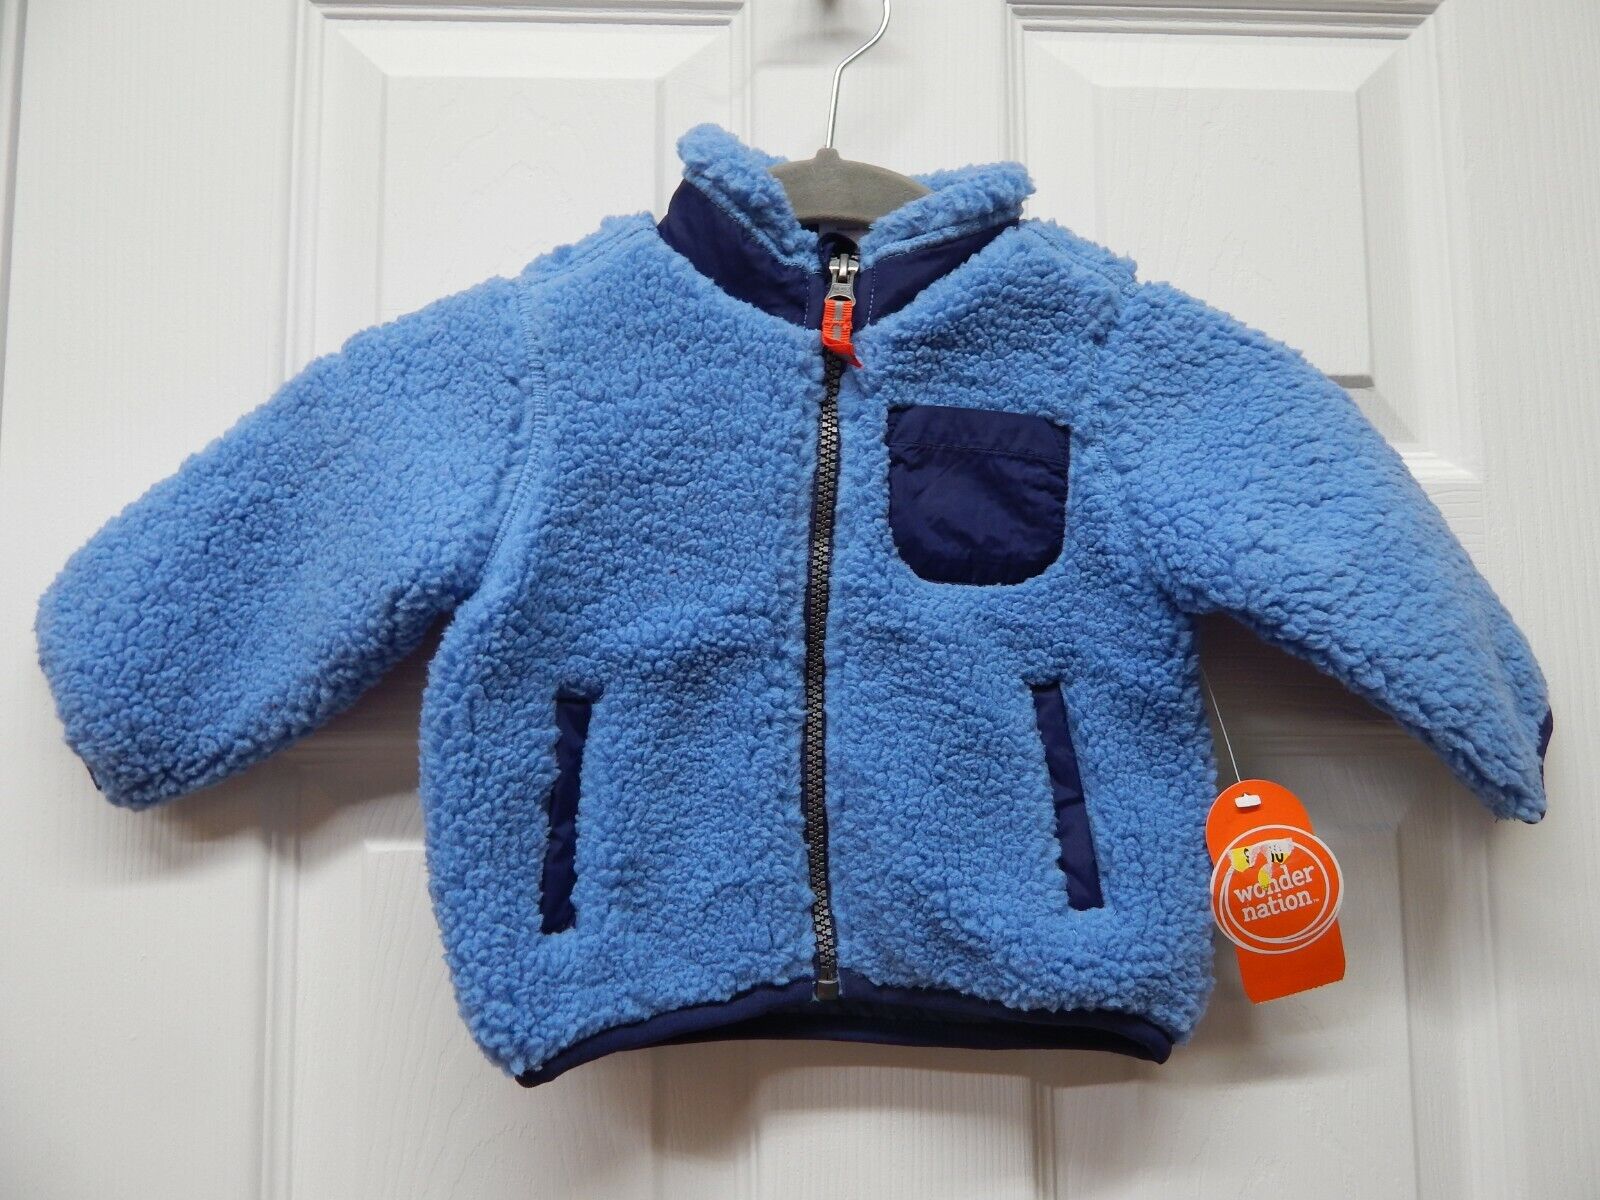 Ranking Outlet ☆ Free Shipping integrated 1st place Wonder Nation Sherpa Winter -Blue-3-6 Jacket Months-NWT